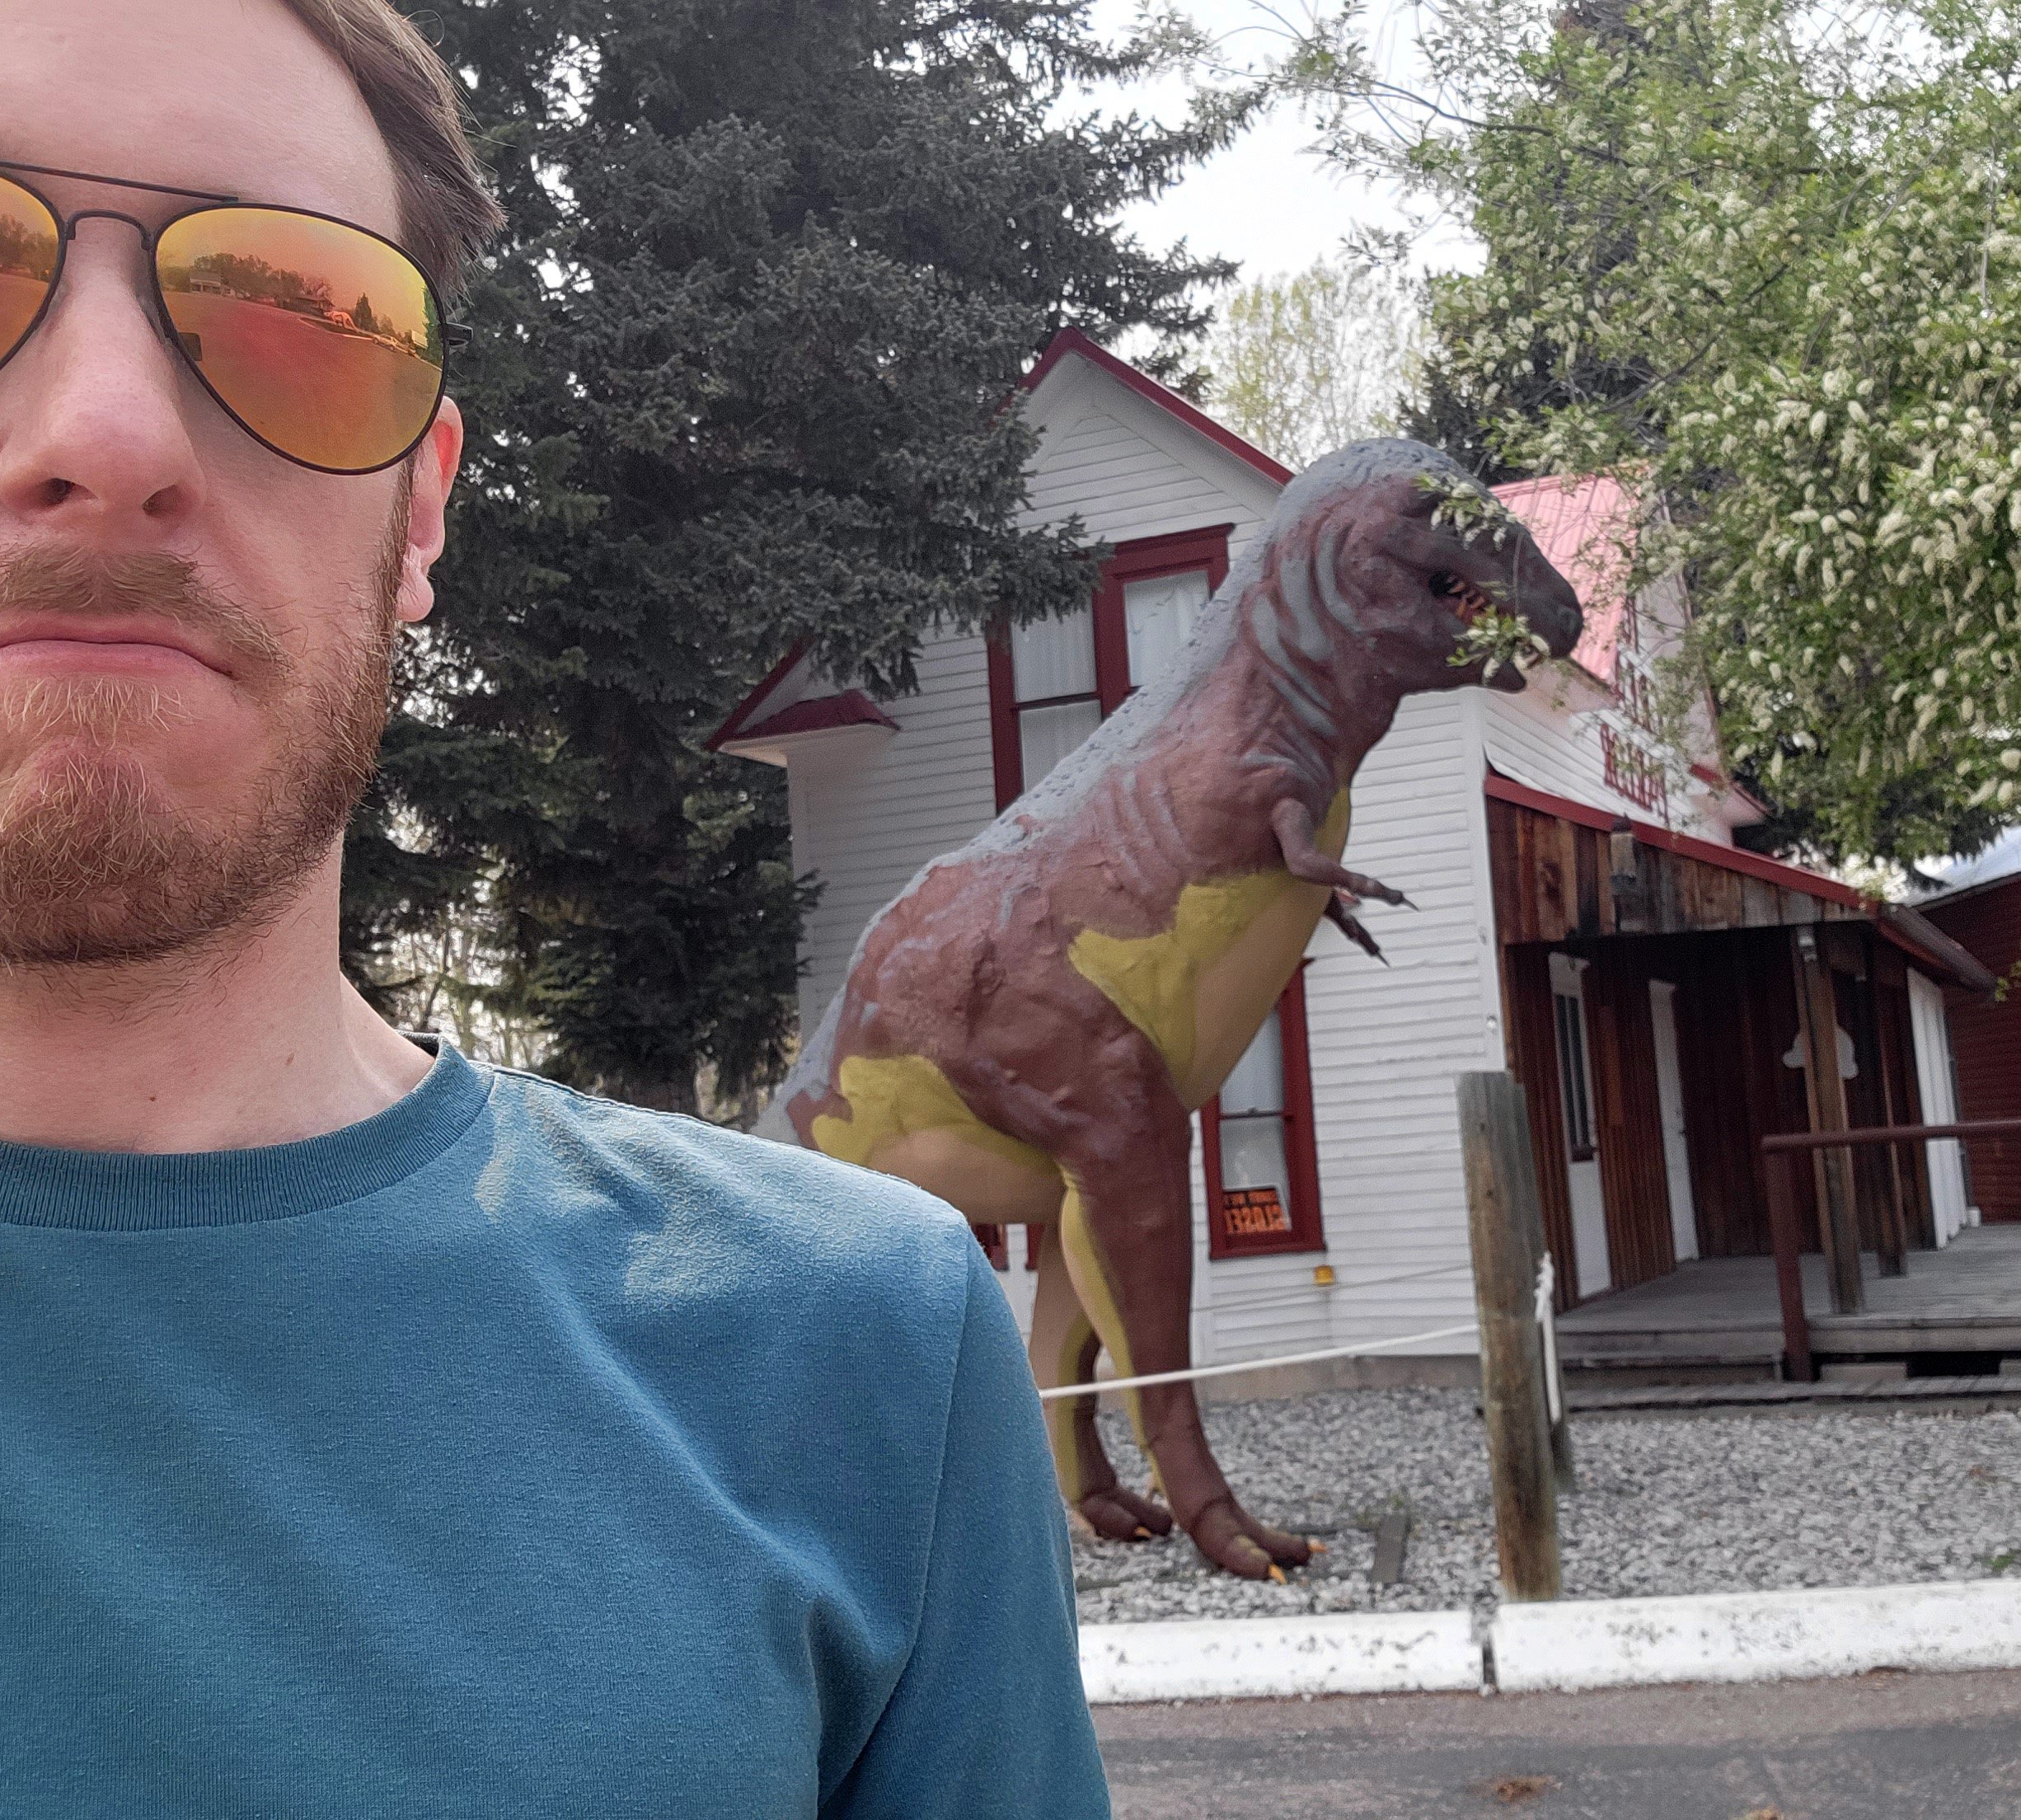 On the way south I randomly passed through this mix of Western + Dinosaur museum. 